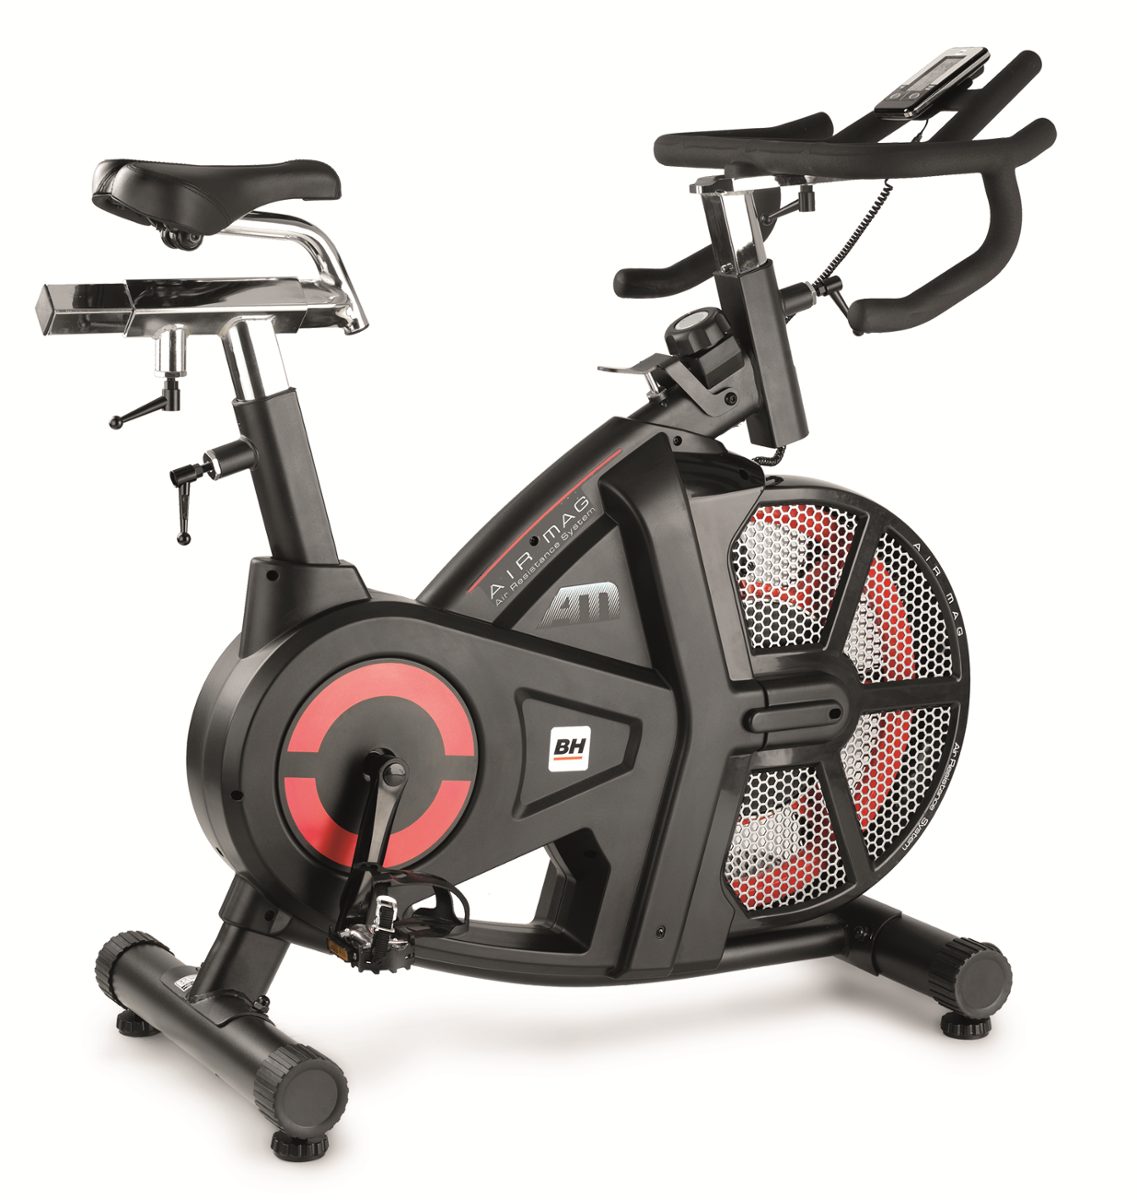  BH Fitness Airmag H9120